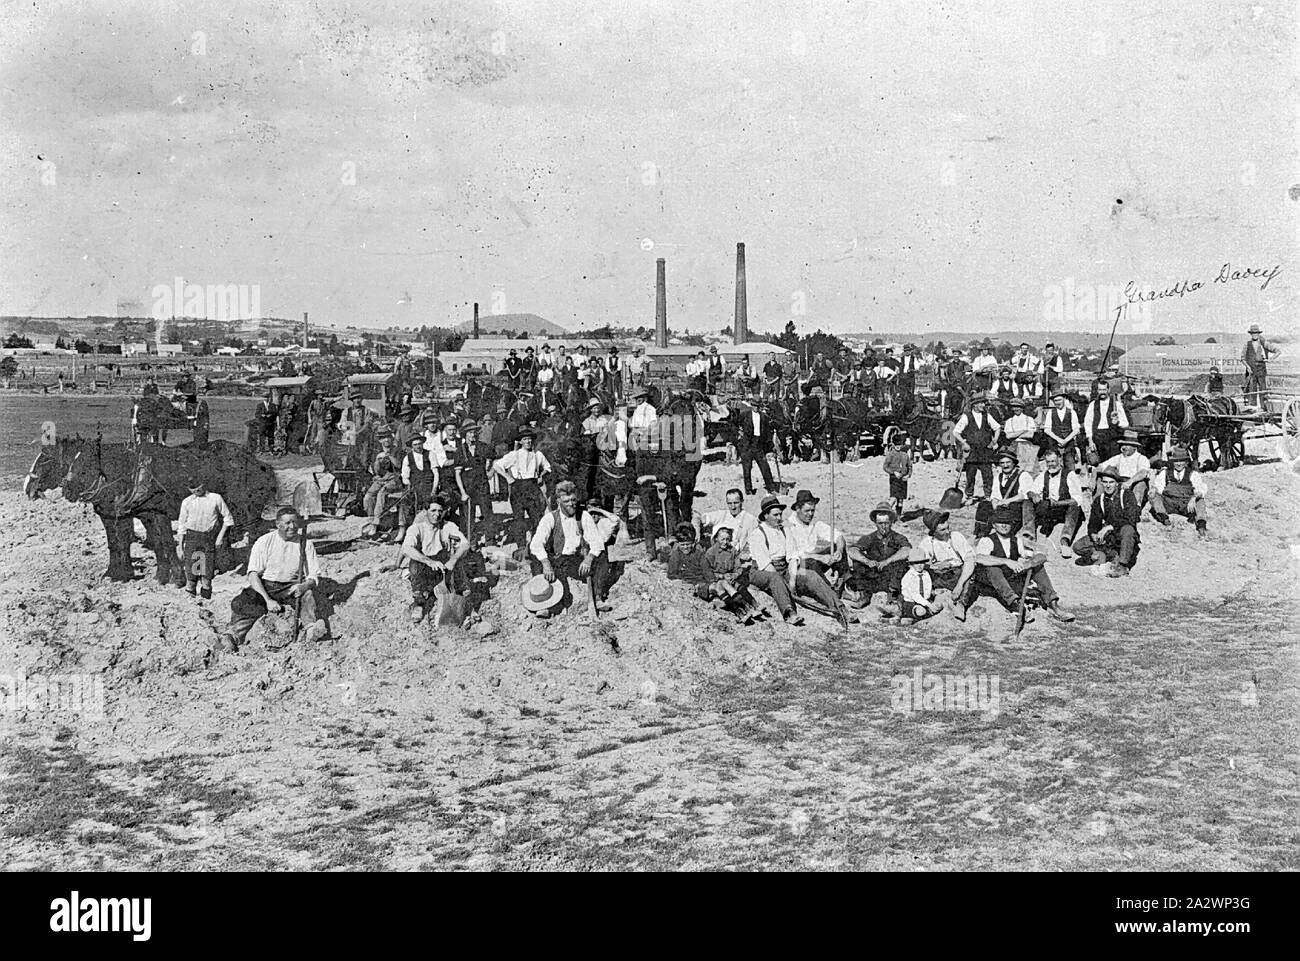 Negative - Ballarat Showgrounds, Victoria, circa 1930, Men and horses on a working bee at the Ballarat Showgrounds. An arrow points to a man identified as 'Grandpa Davey'. The chimneys of a mill can be seen in the background Stock Photo